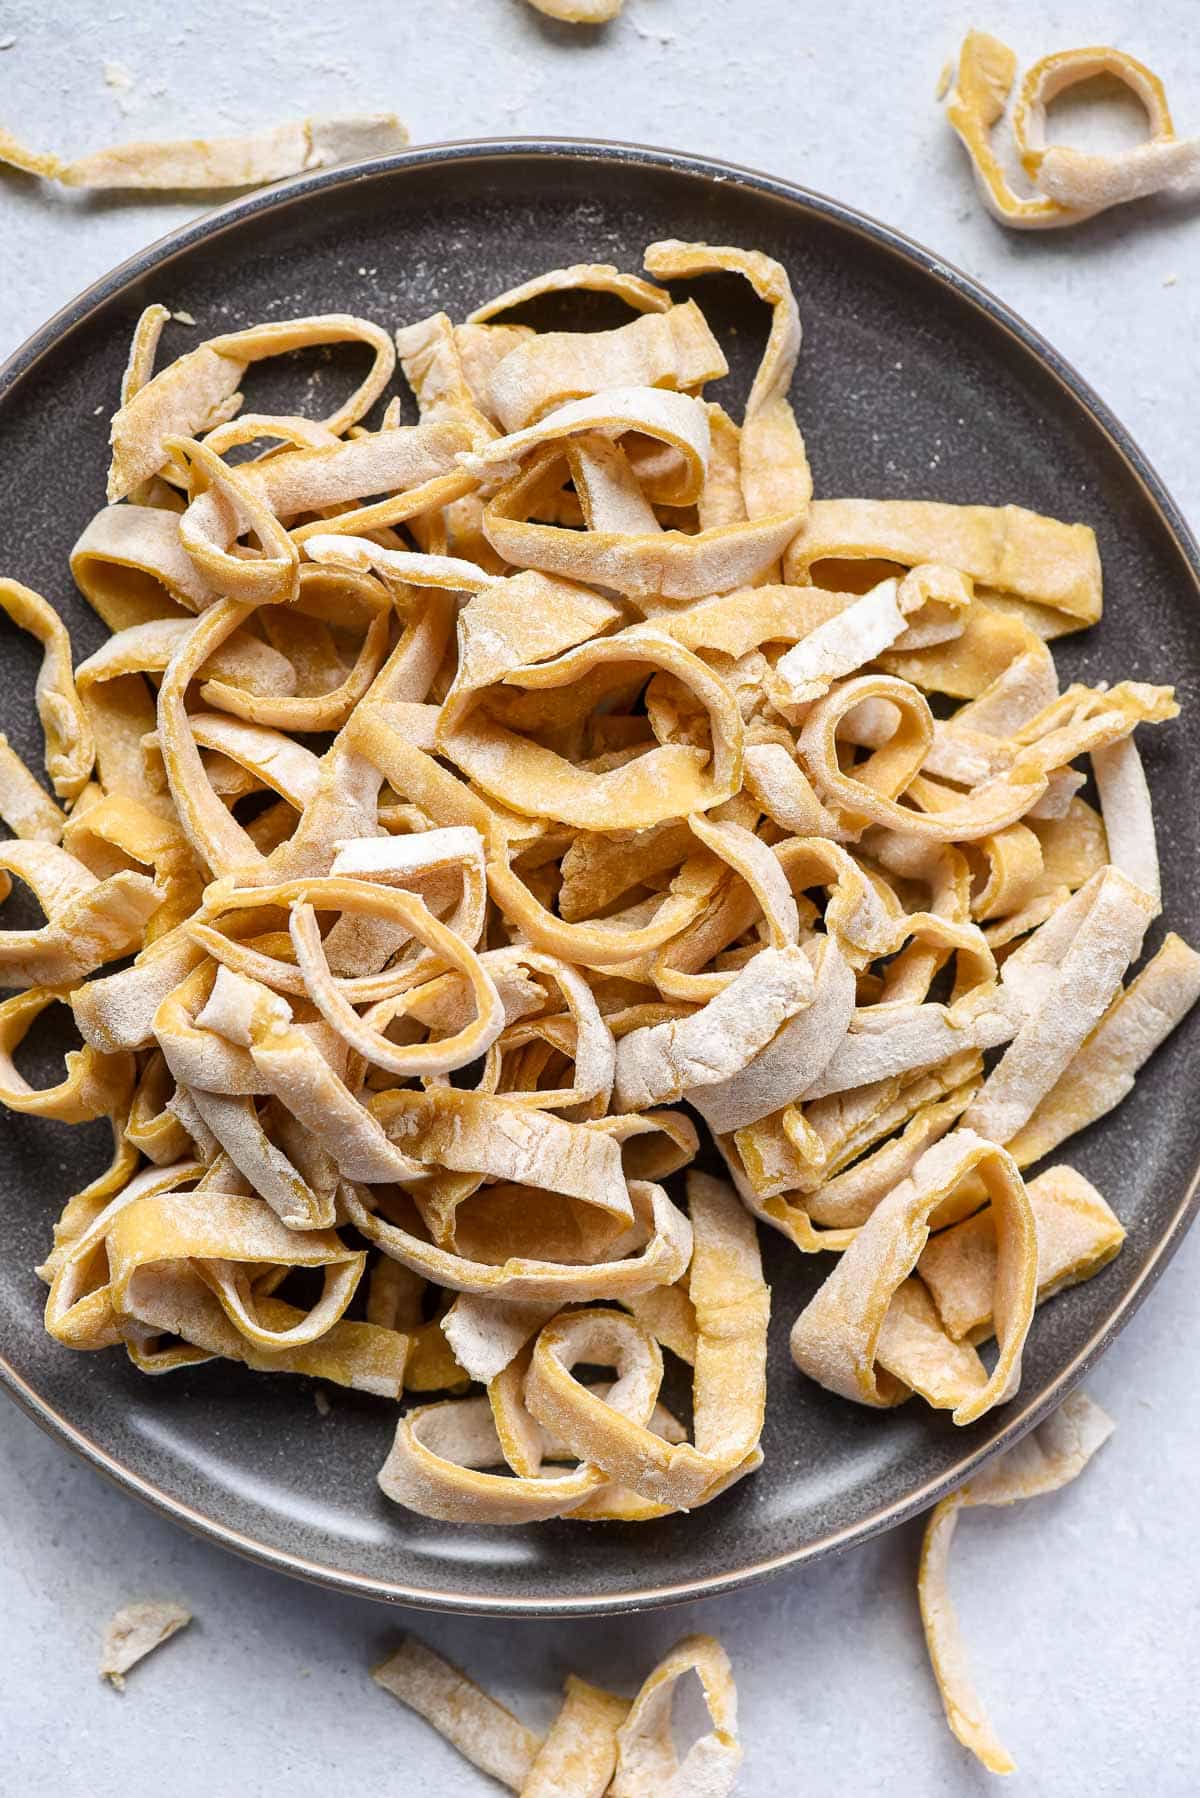 Pile of homemade egg noodles on a plate